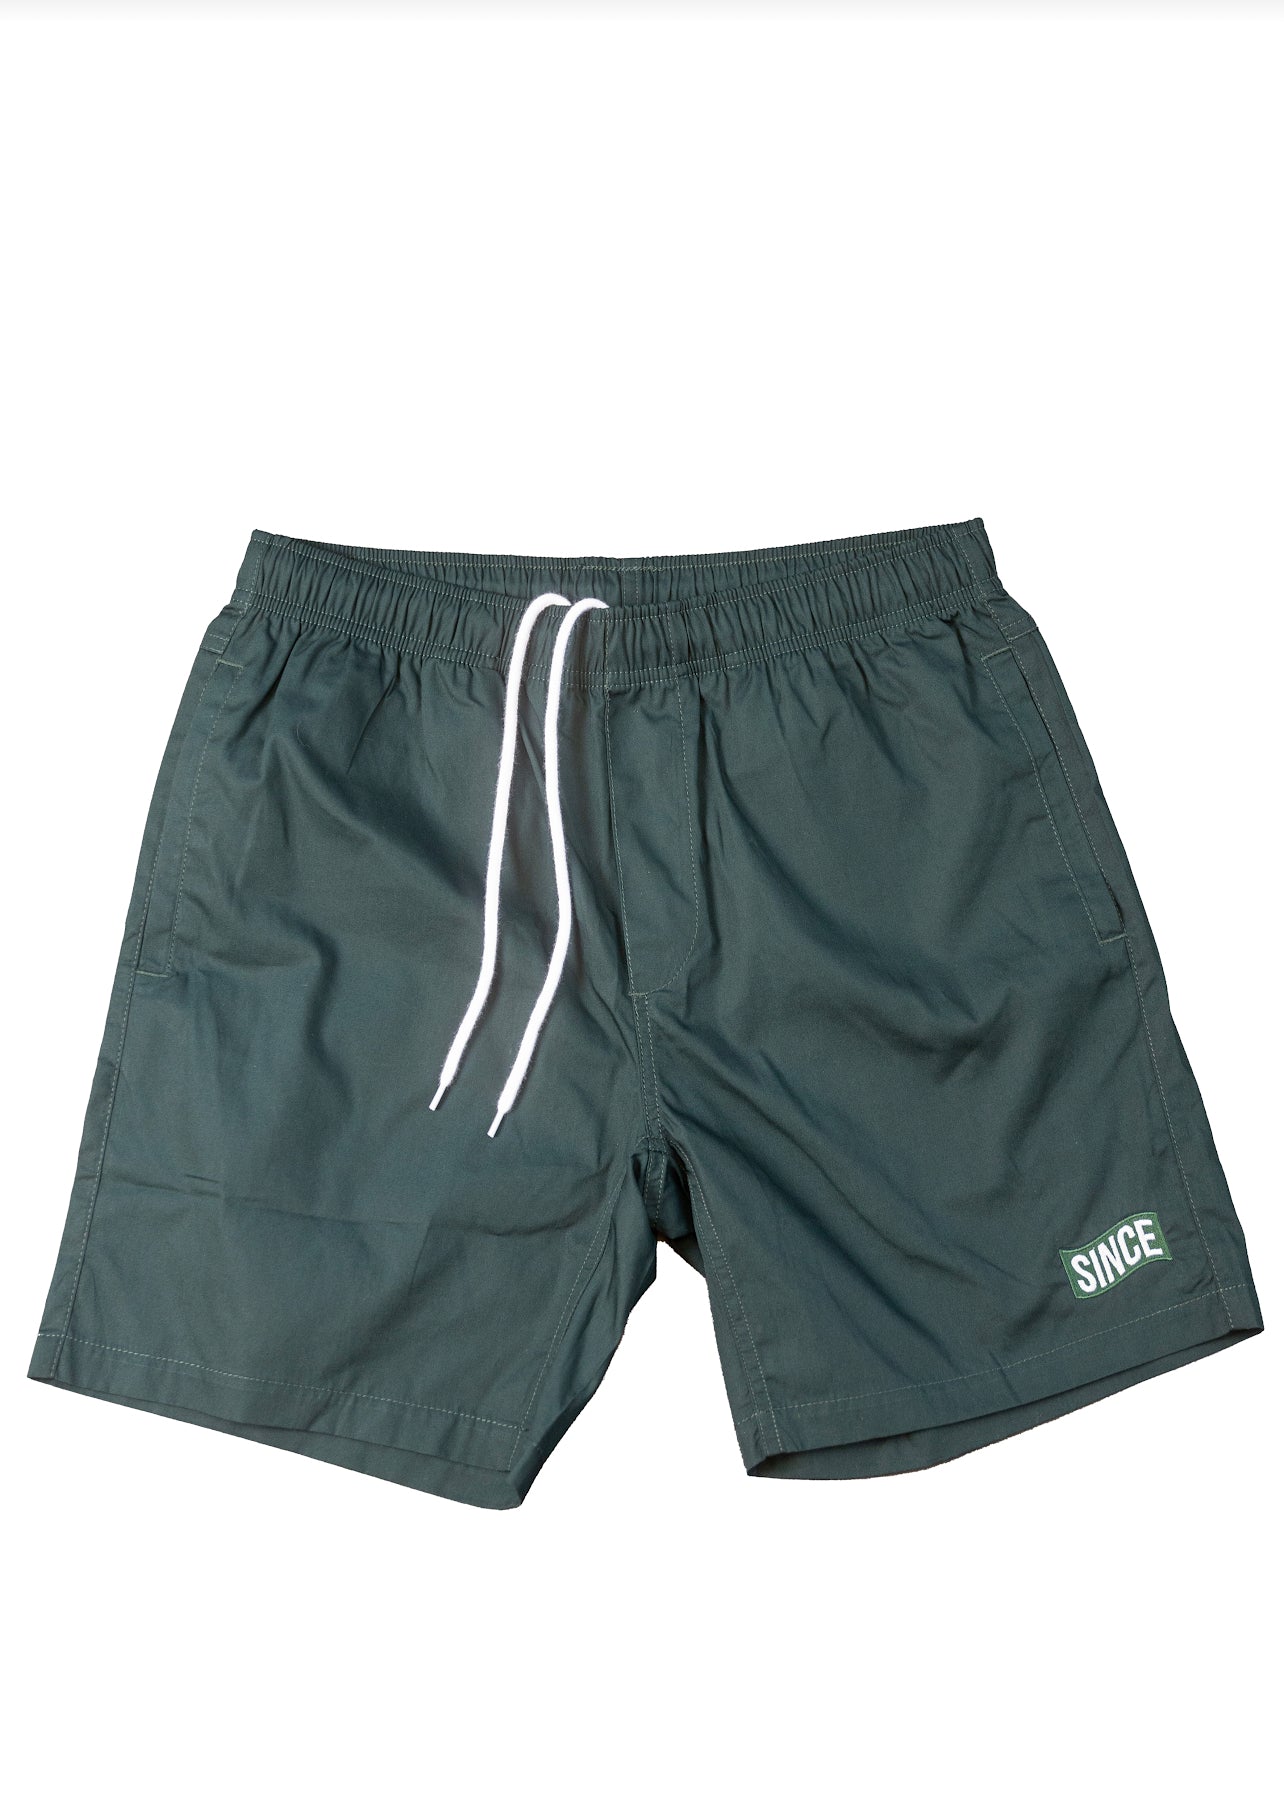 Spruce Since Sand Shorts (Above The Knee)